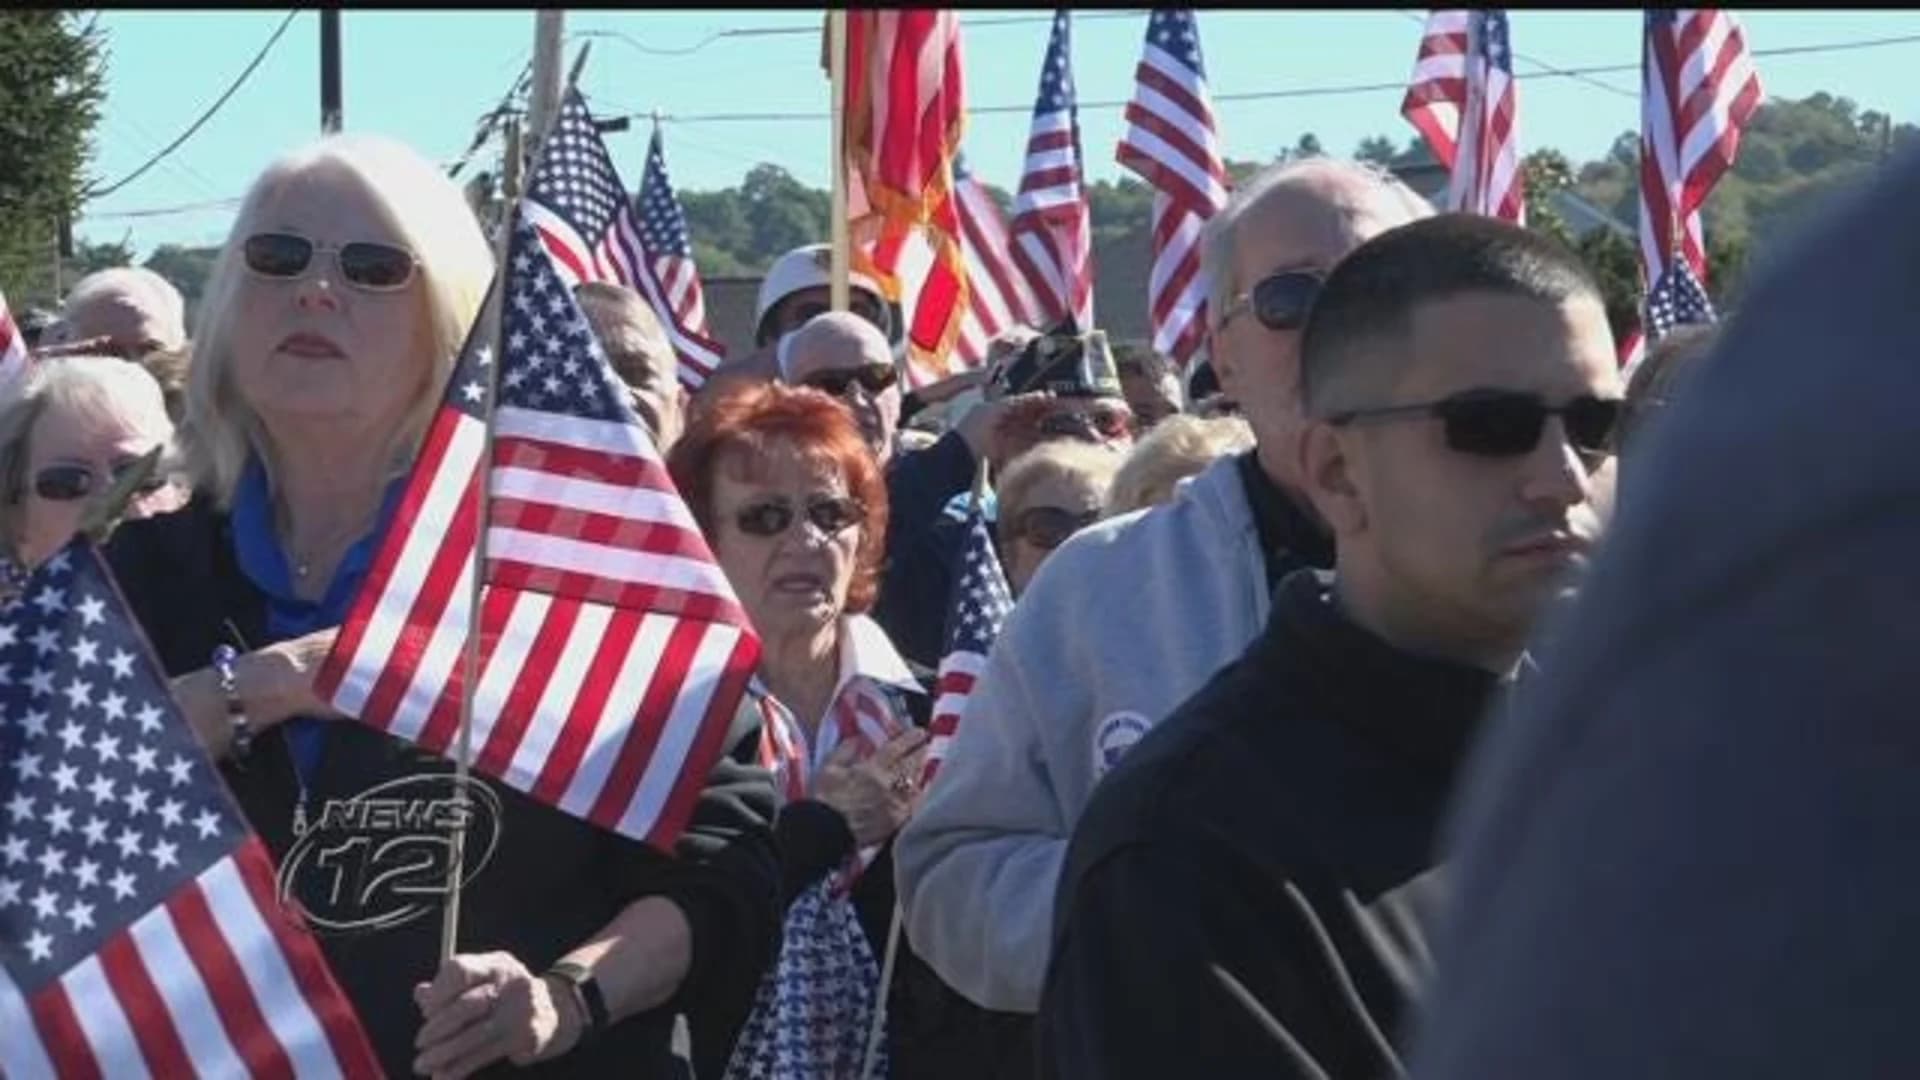 Over 100 gather at ‘Stand up for America’ rally in Carmel